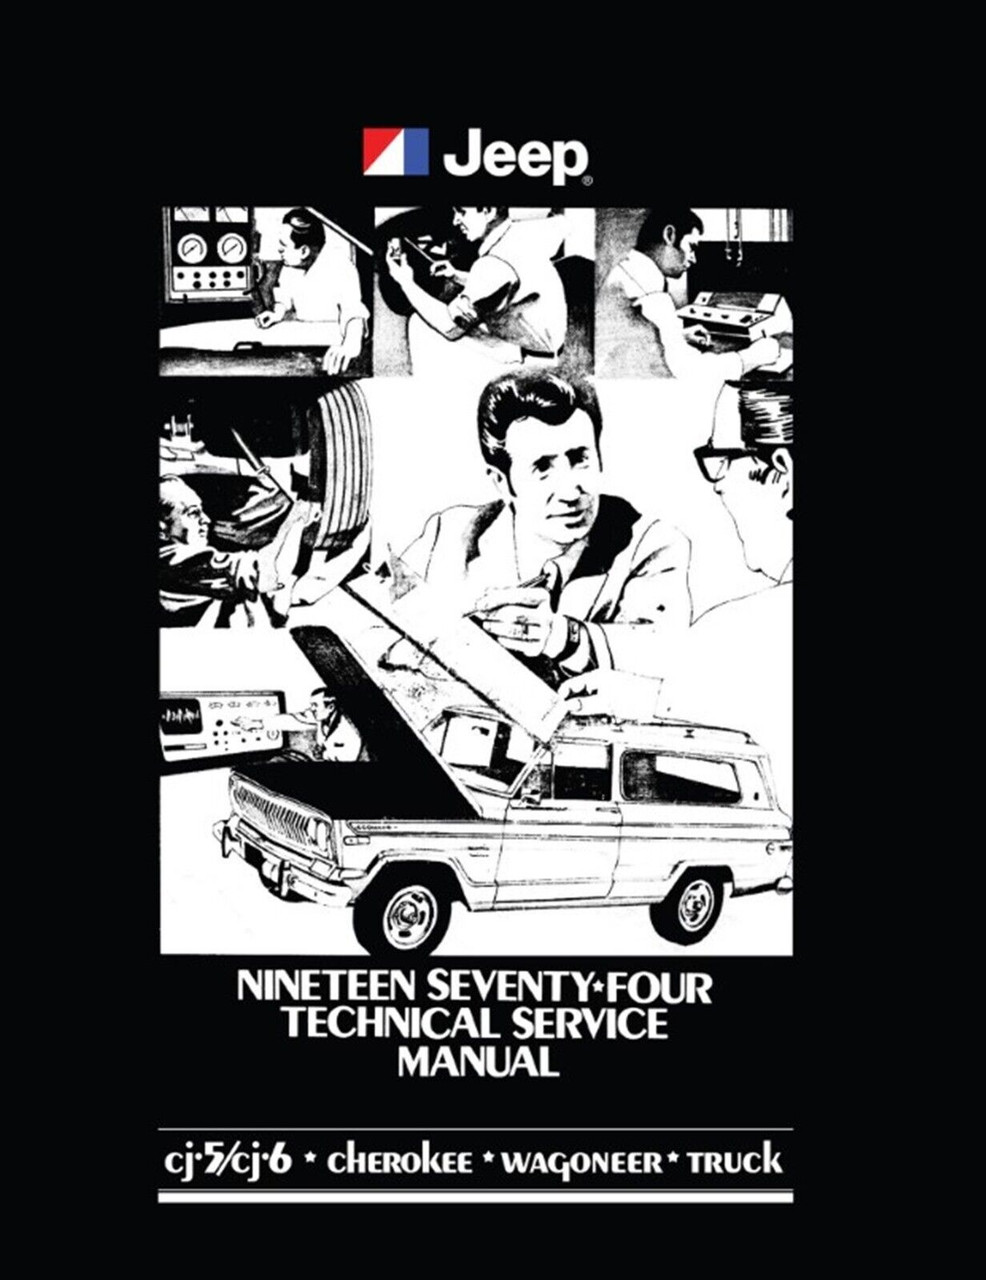 1974 Jeep Service Manual (Body/Chassis)